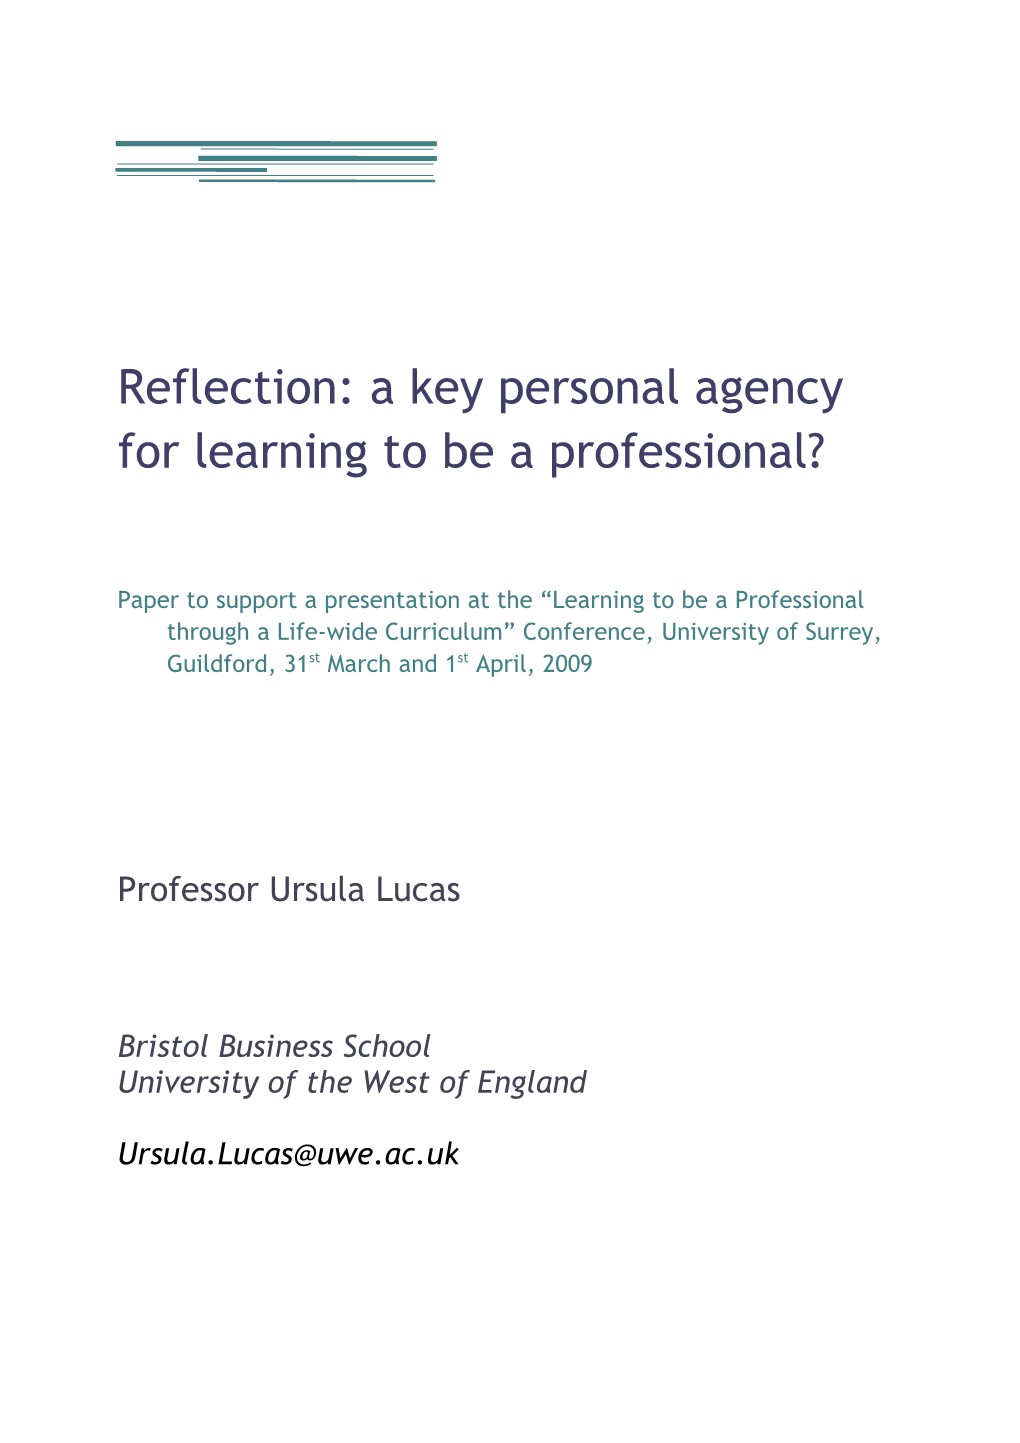 Reflection: a Key Personal Agency for Learning to Be a Professional?